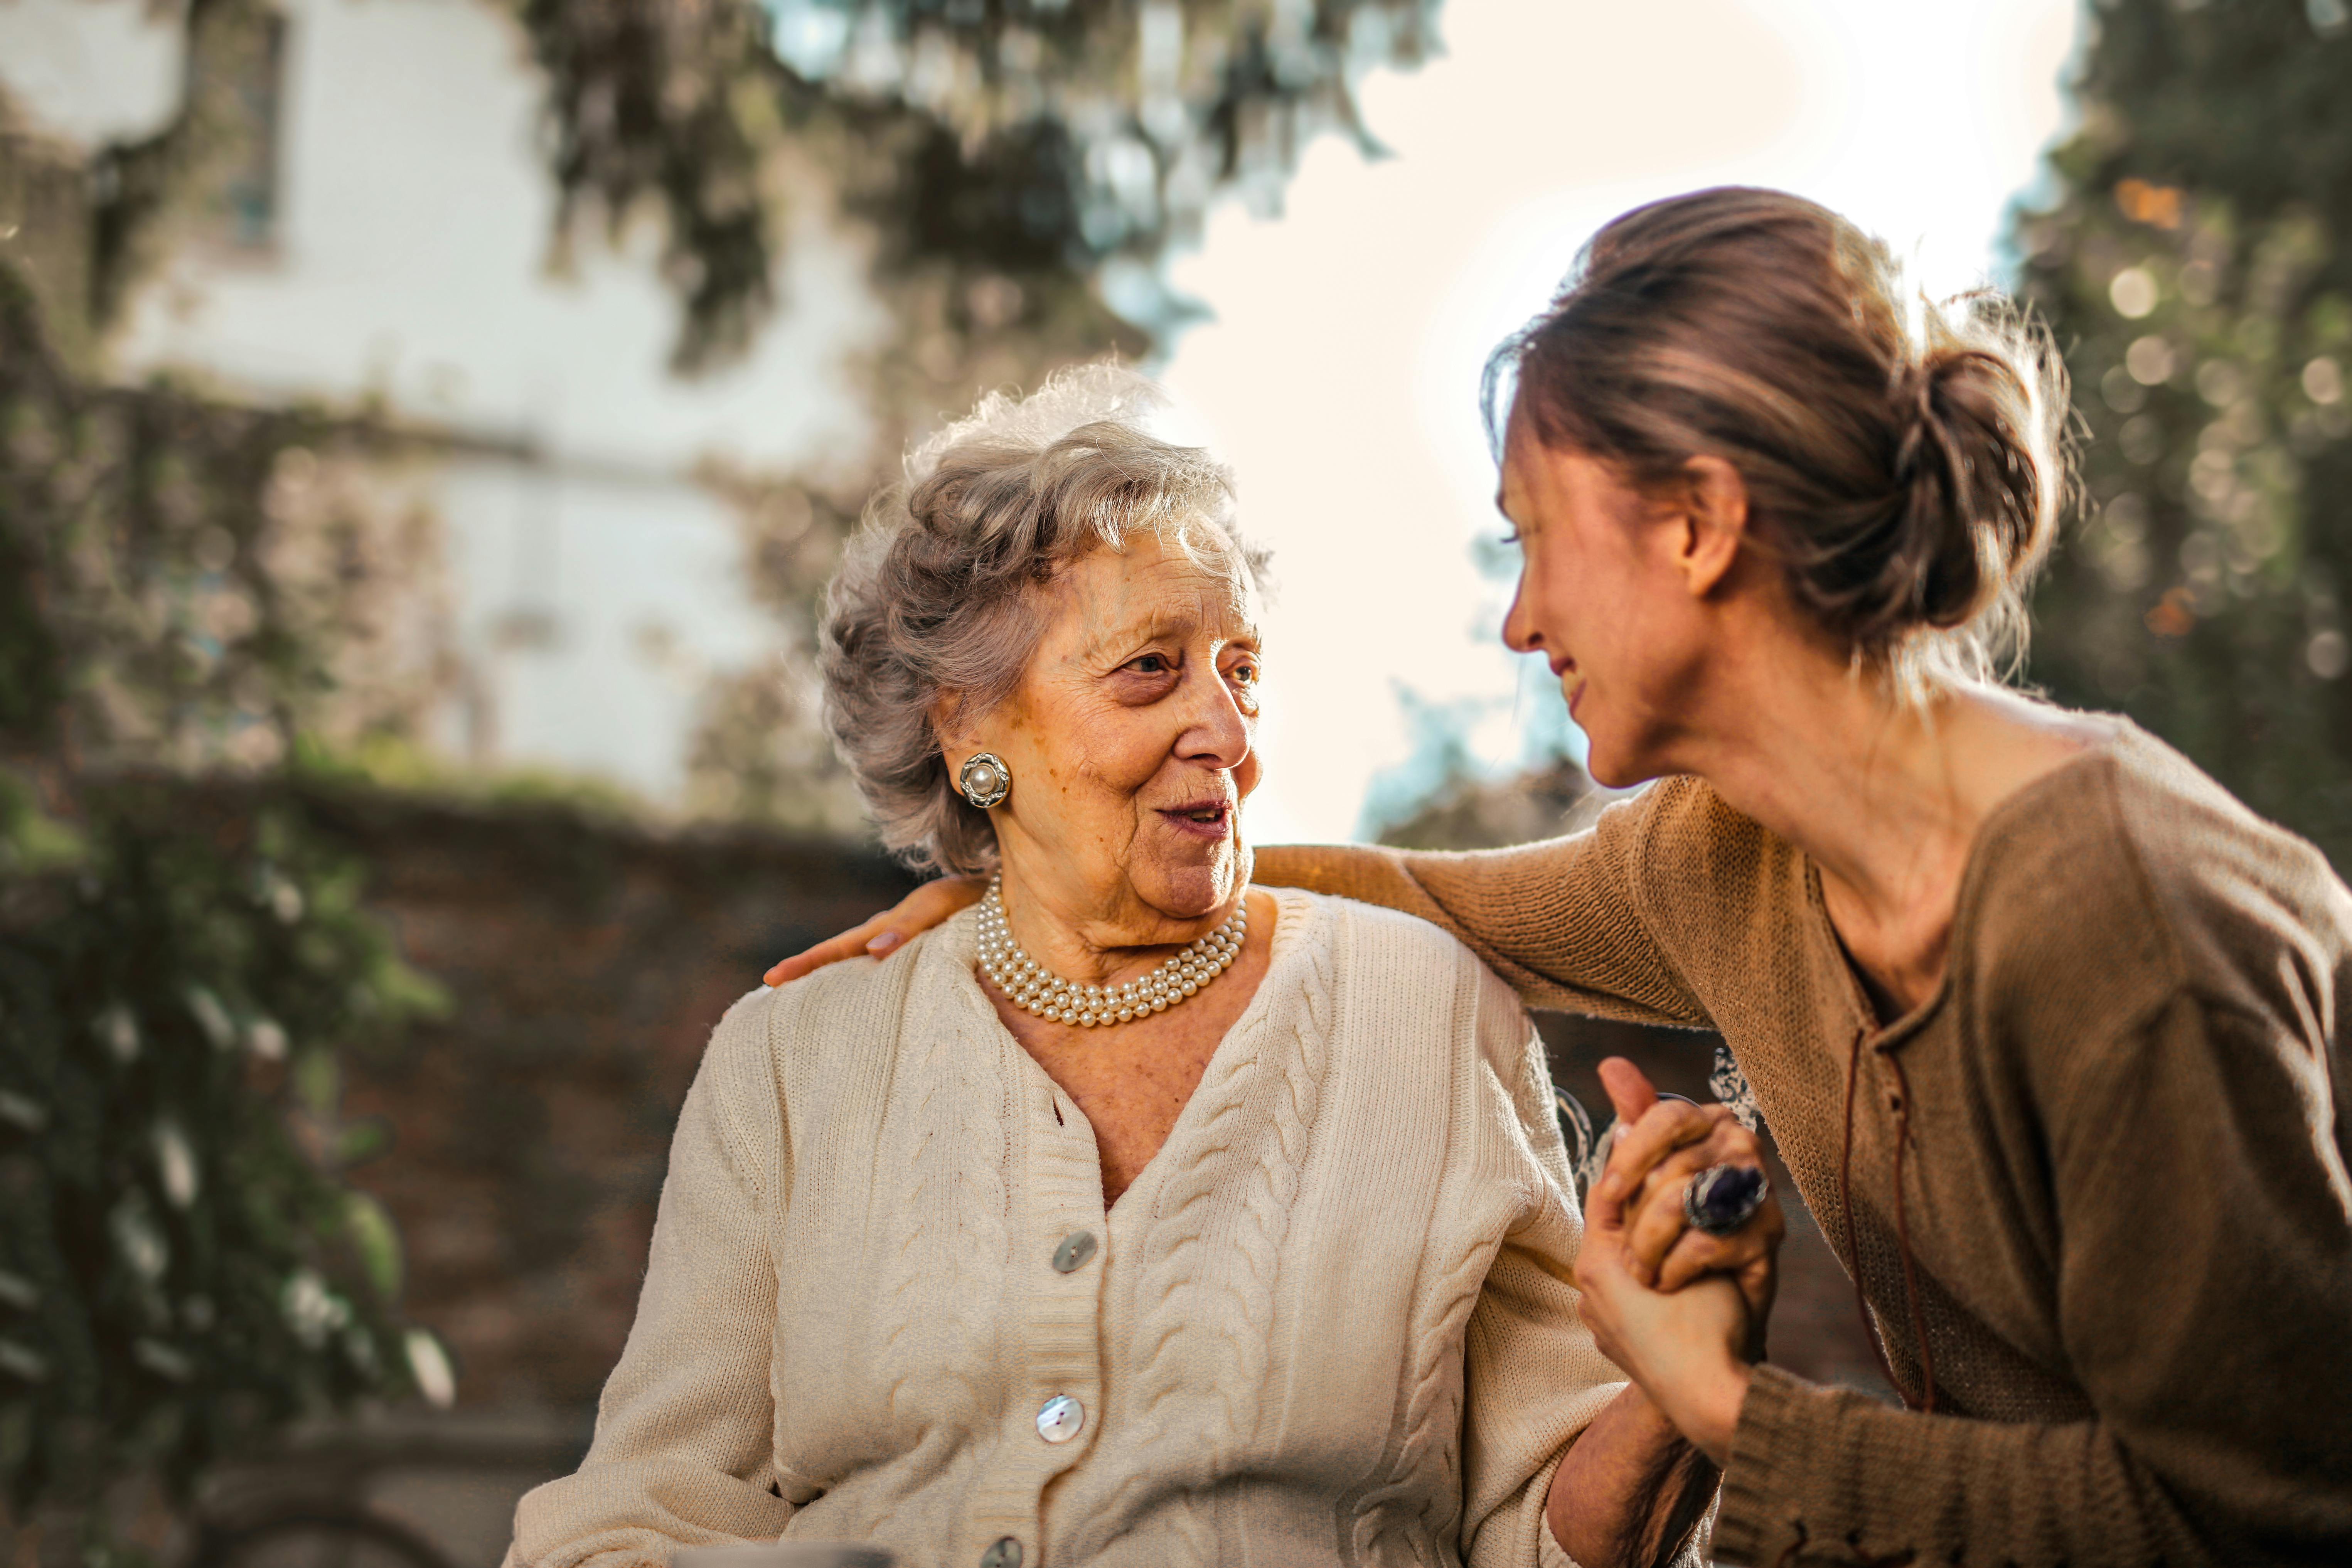 A young woman and a senior woman holding hands and talking | Source: Pexels